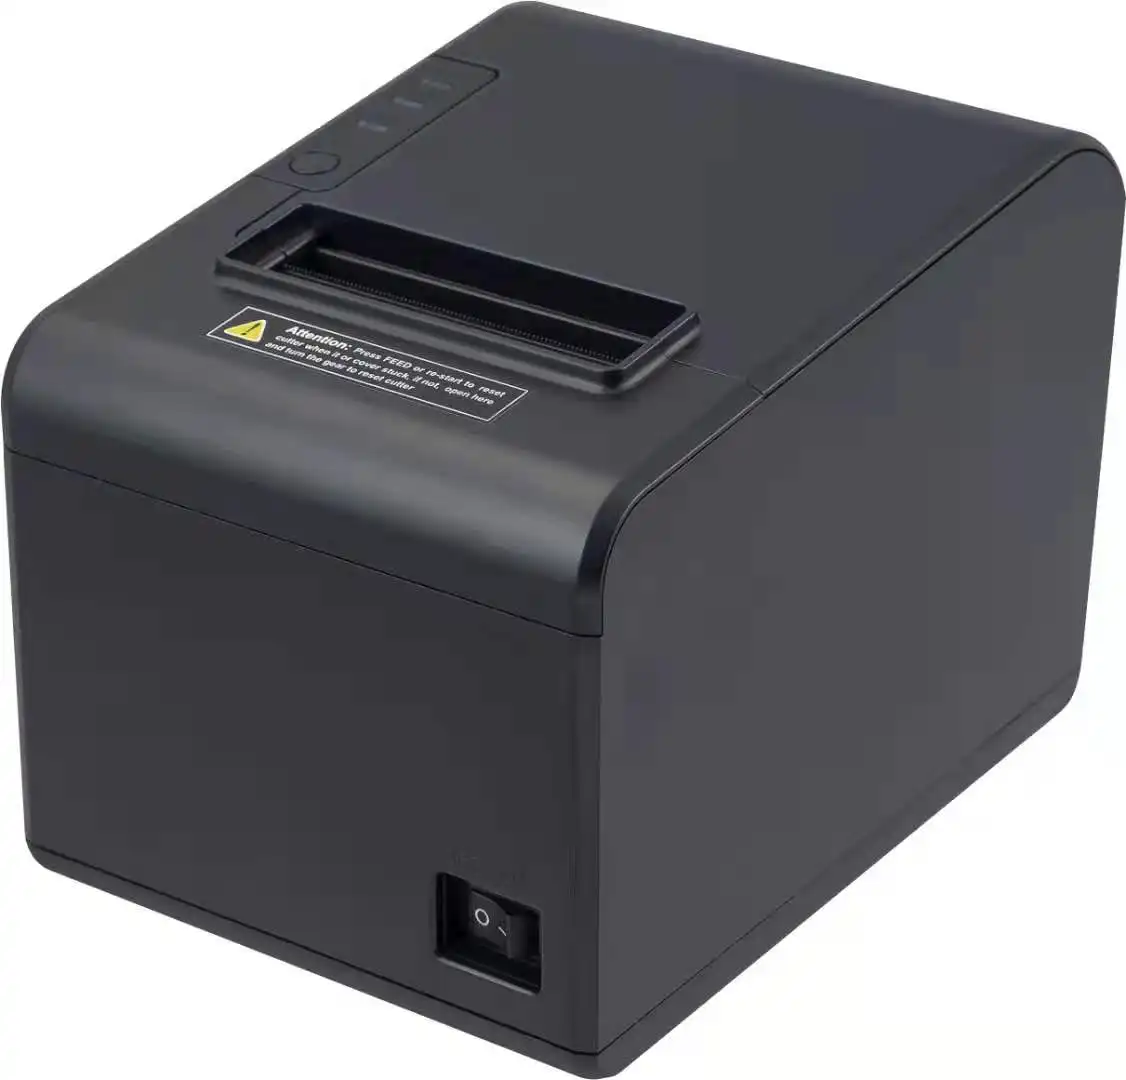 JJ-804 80mm Thermal Printer USB+LAN for Point of Sale System Convenient to Use for Supermarket Restaurant Retail